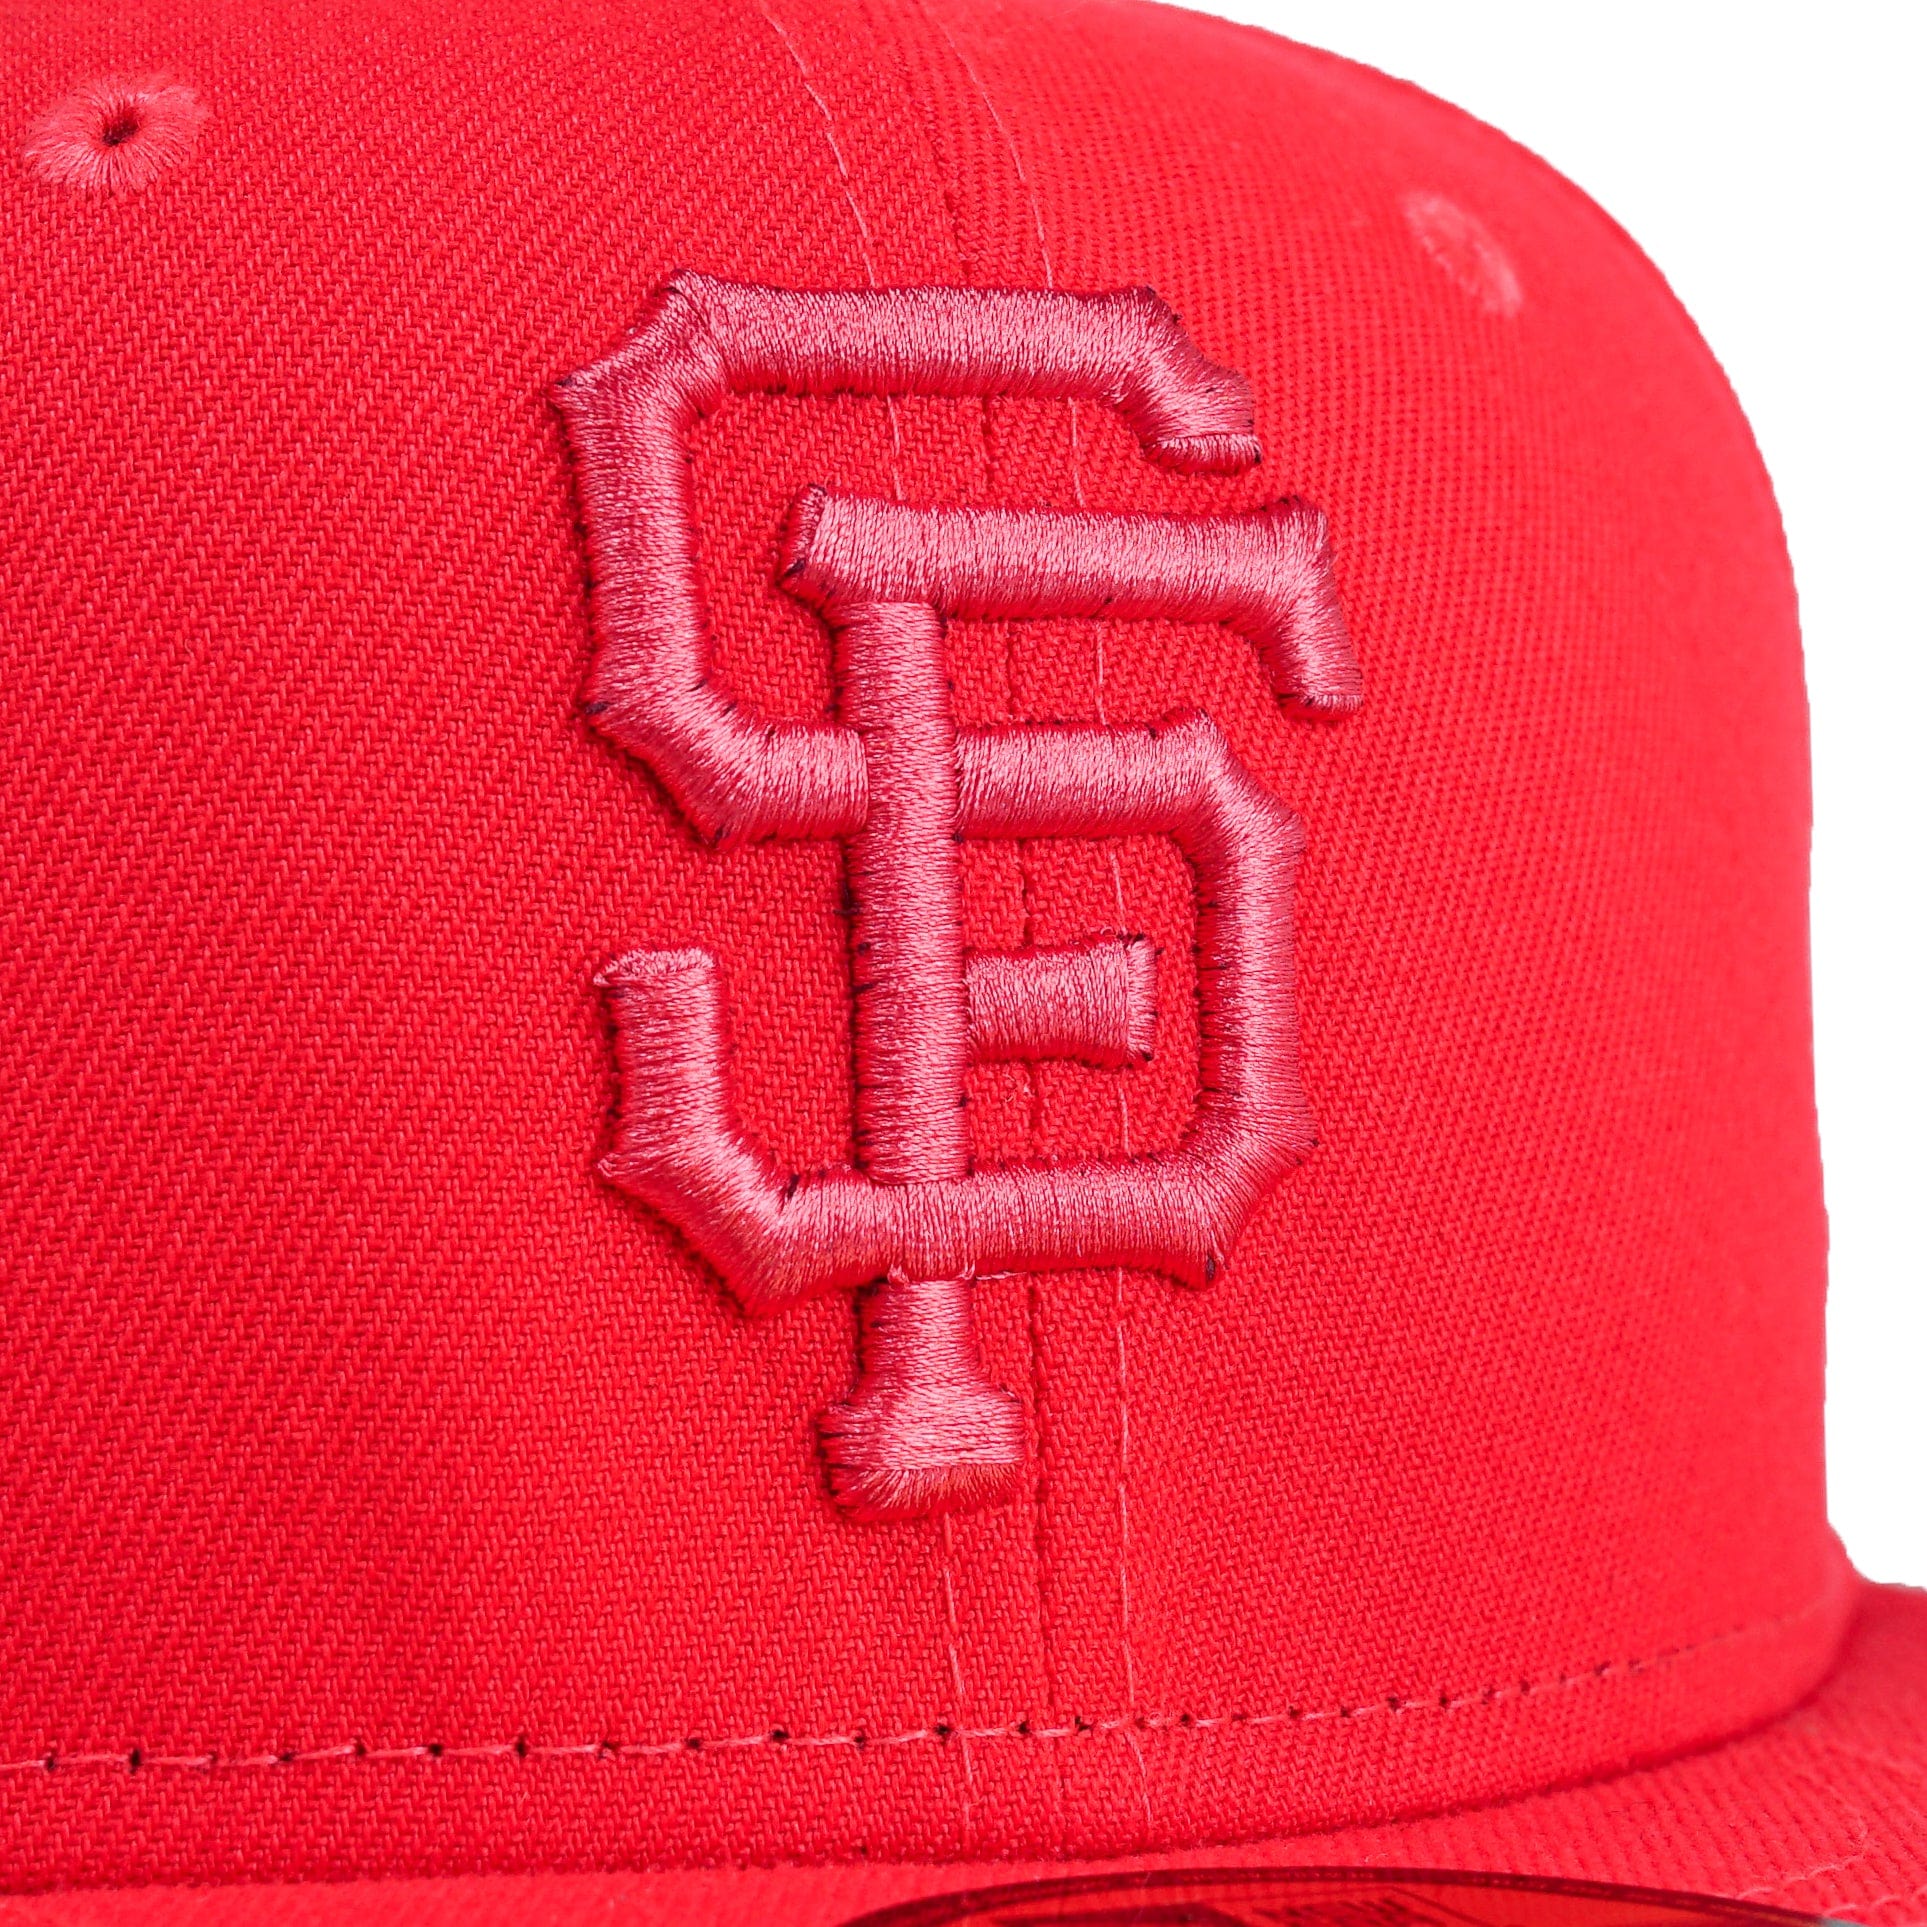 San Francisco Giants Colorpack 59Fifty Fitted Hat in strawberry